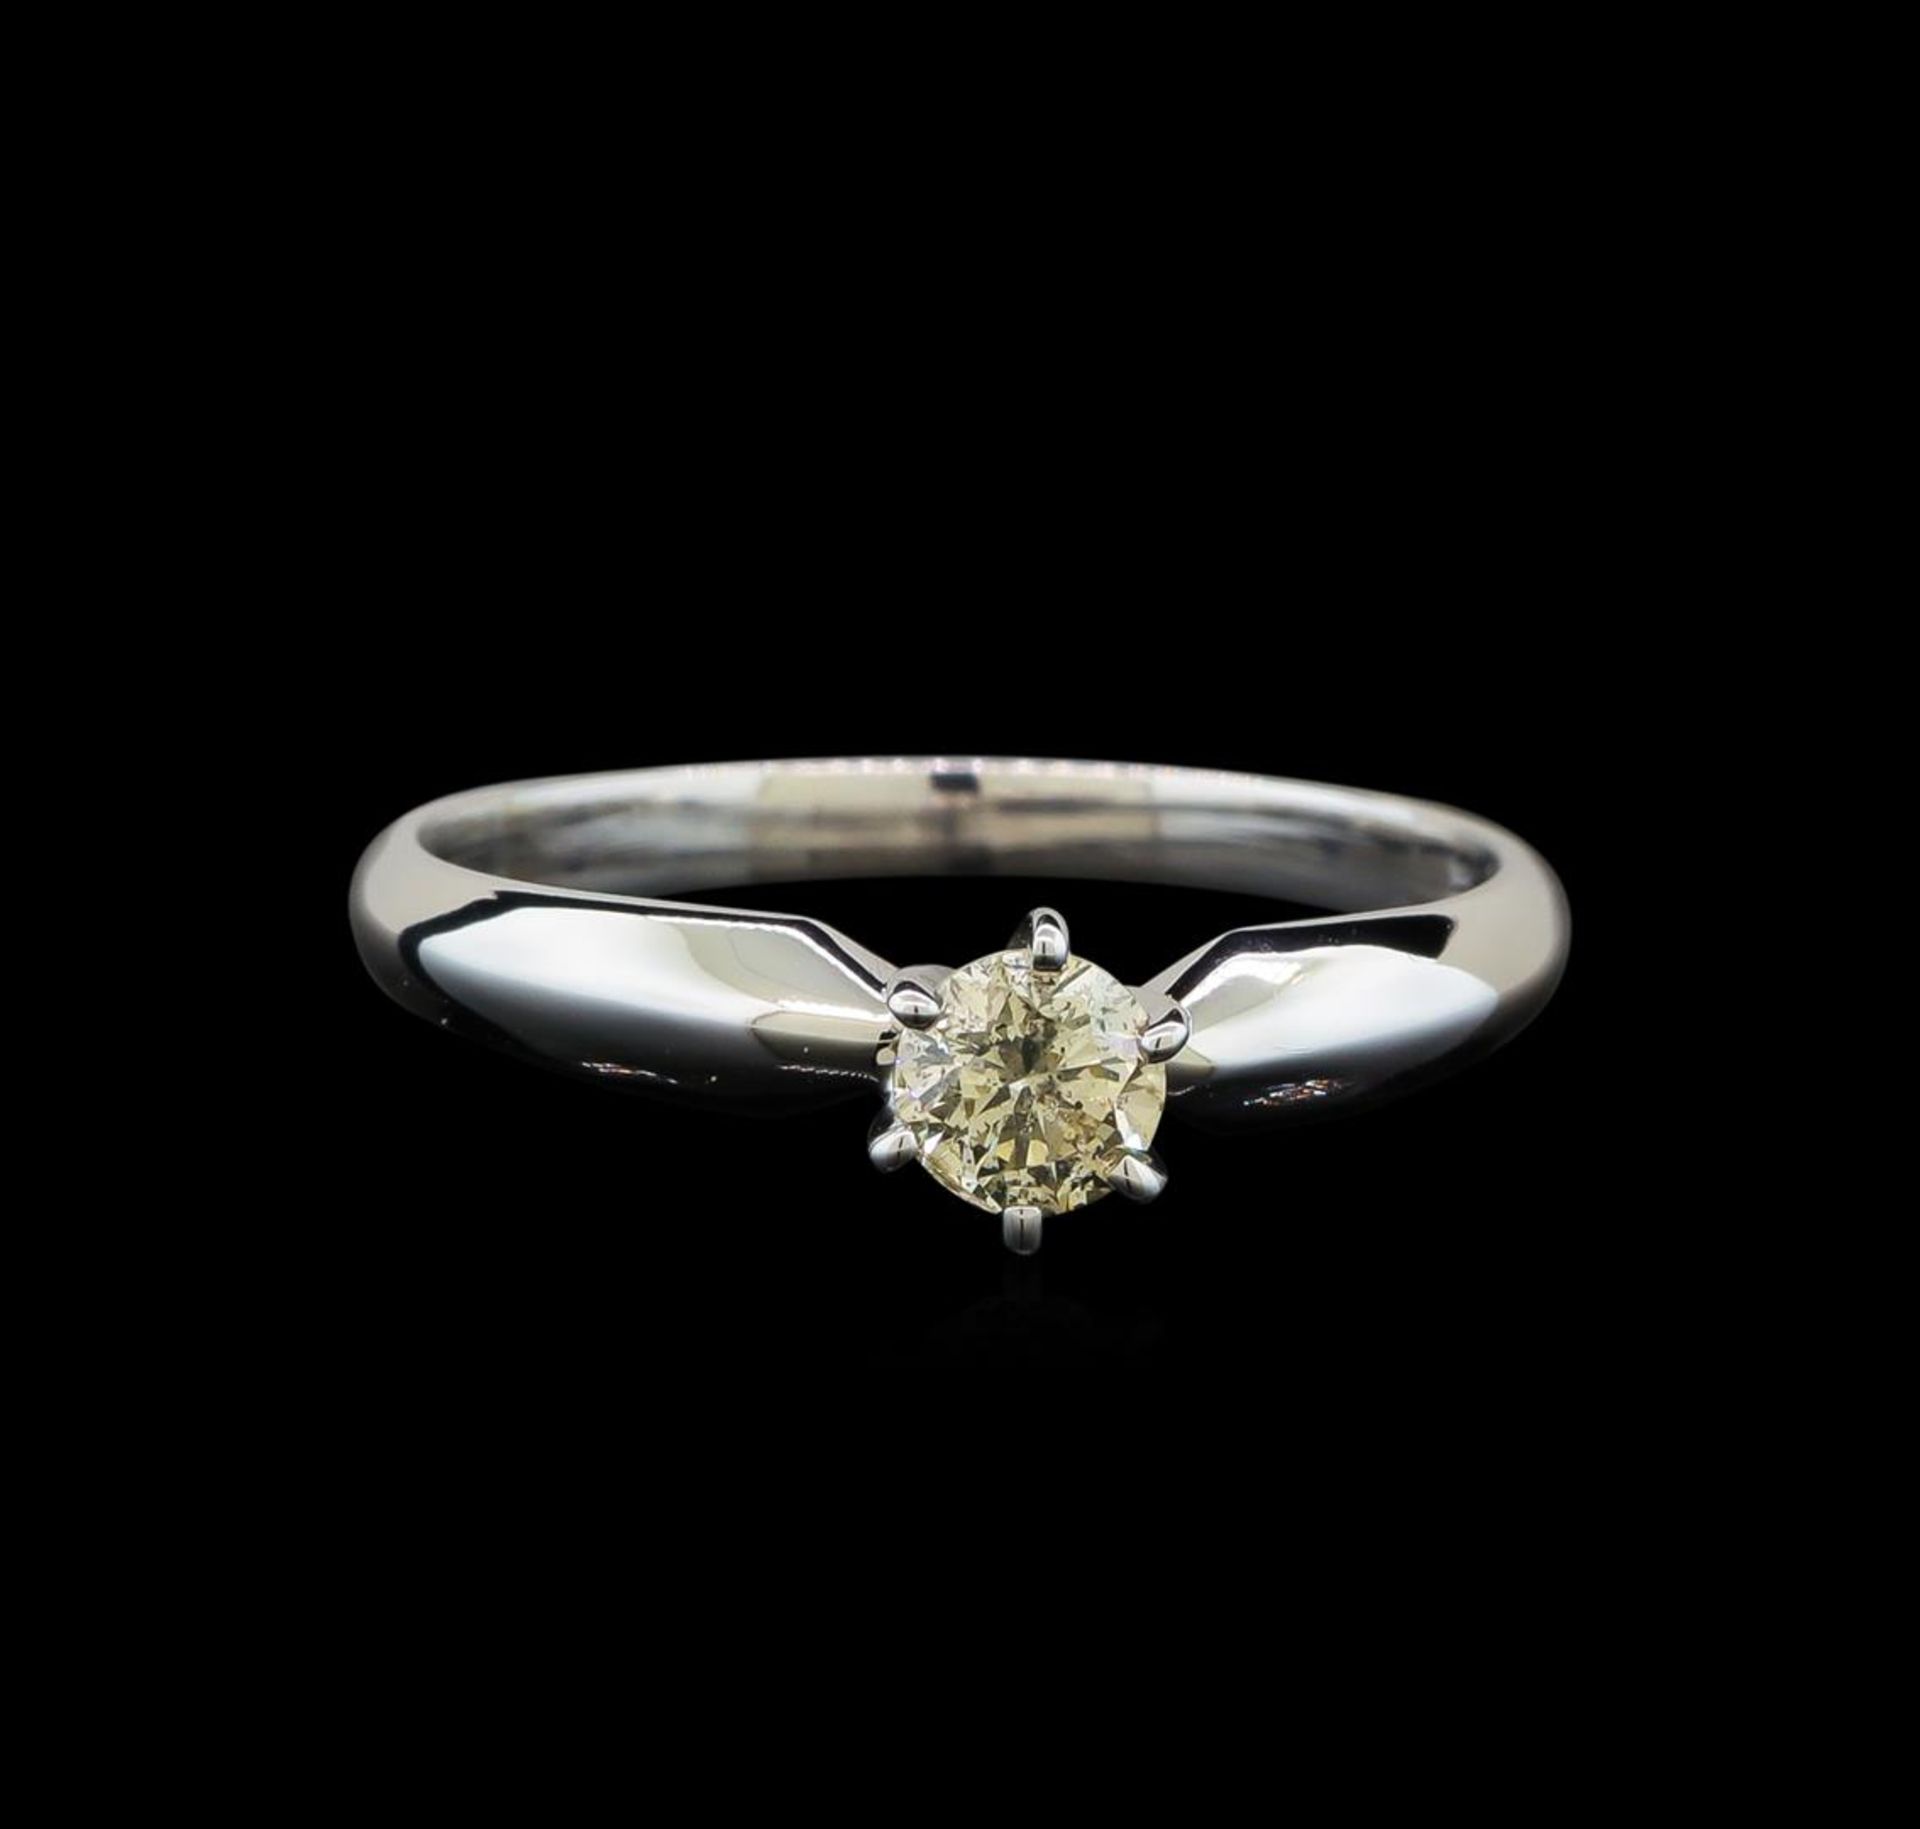 14KT White Gold 0.33 ctw Round Cut Diamond Solitaire Ring - Image 2 of 5